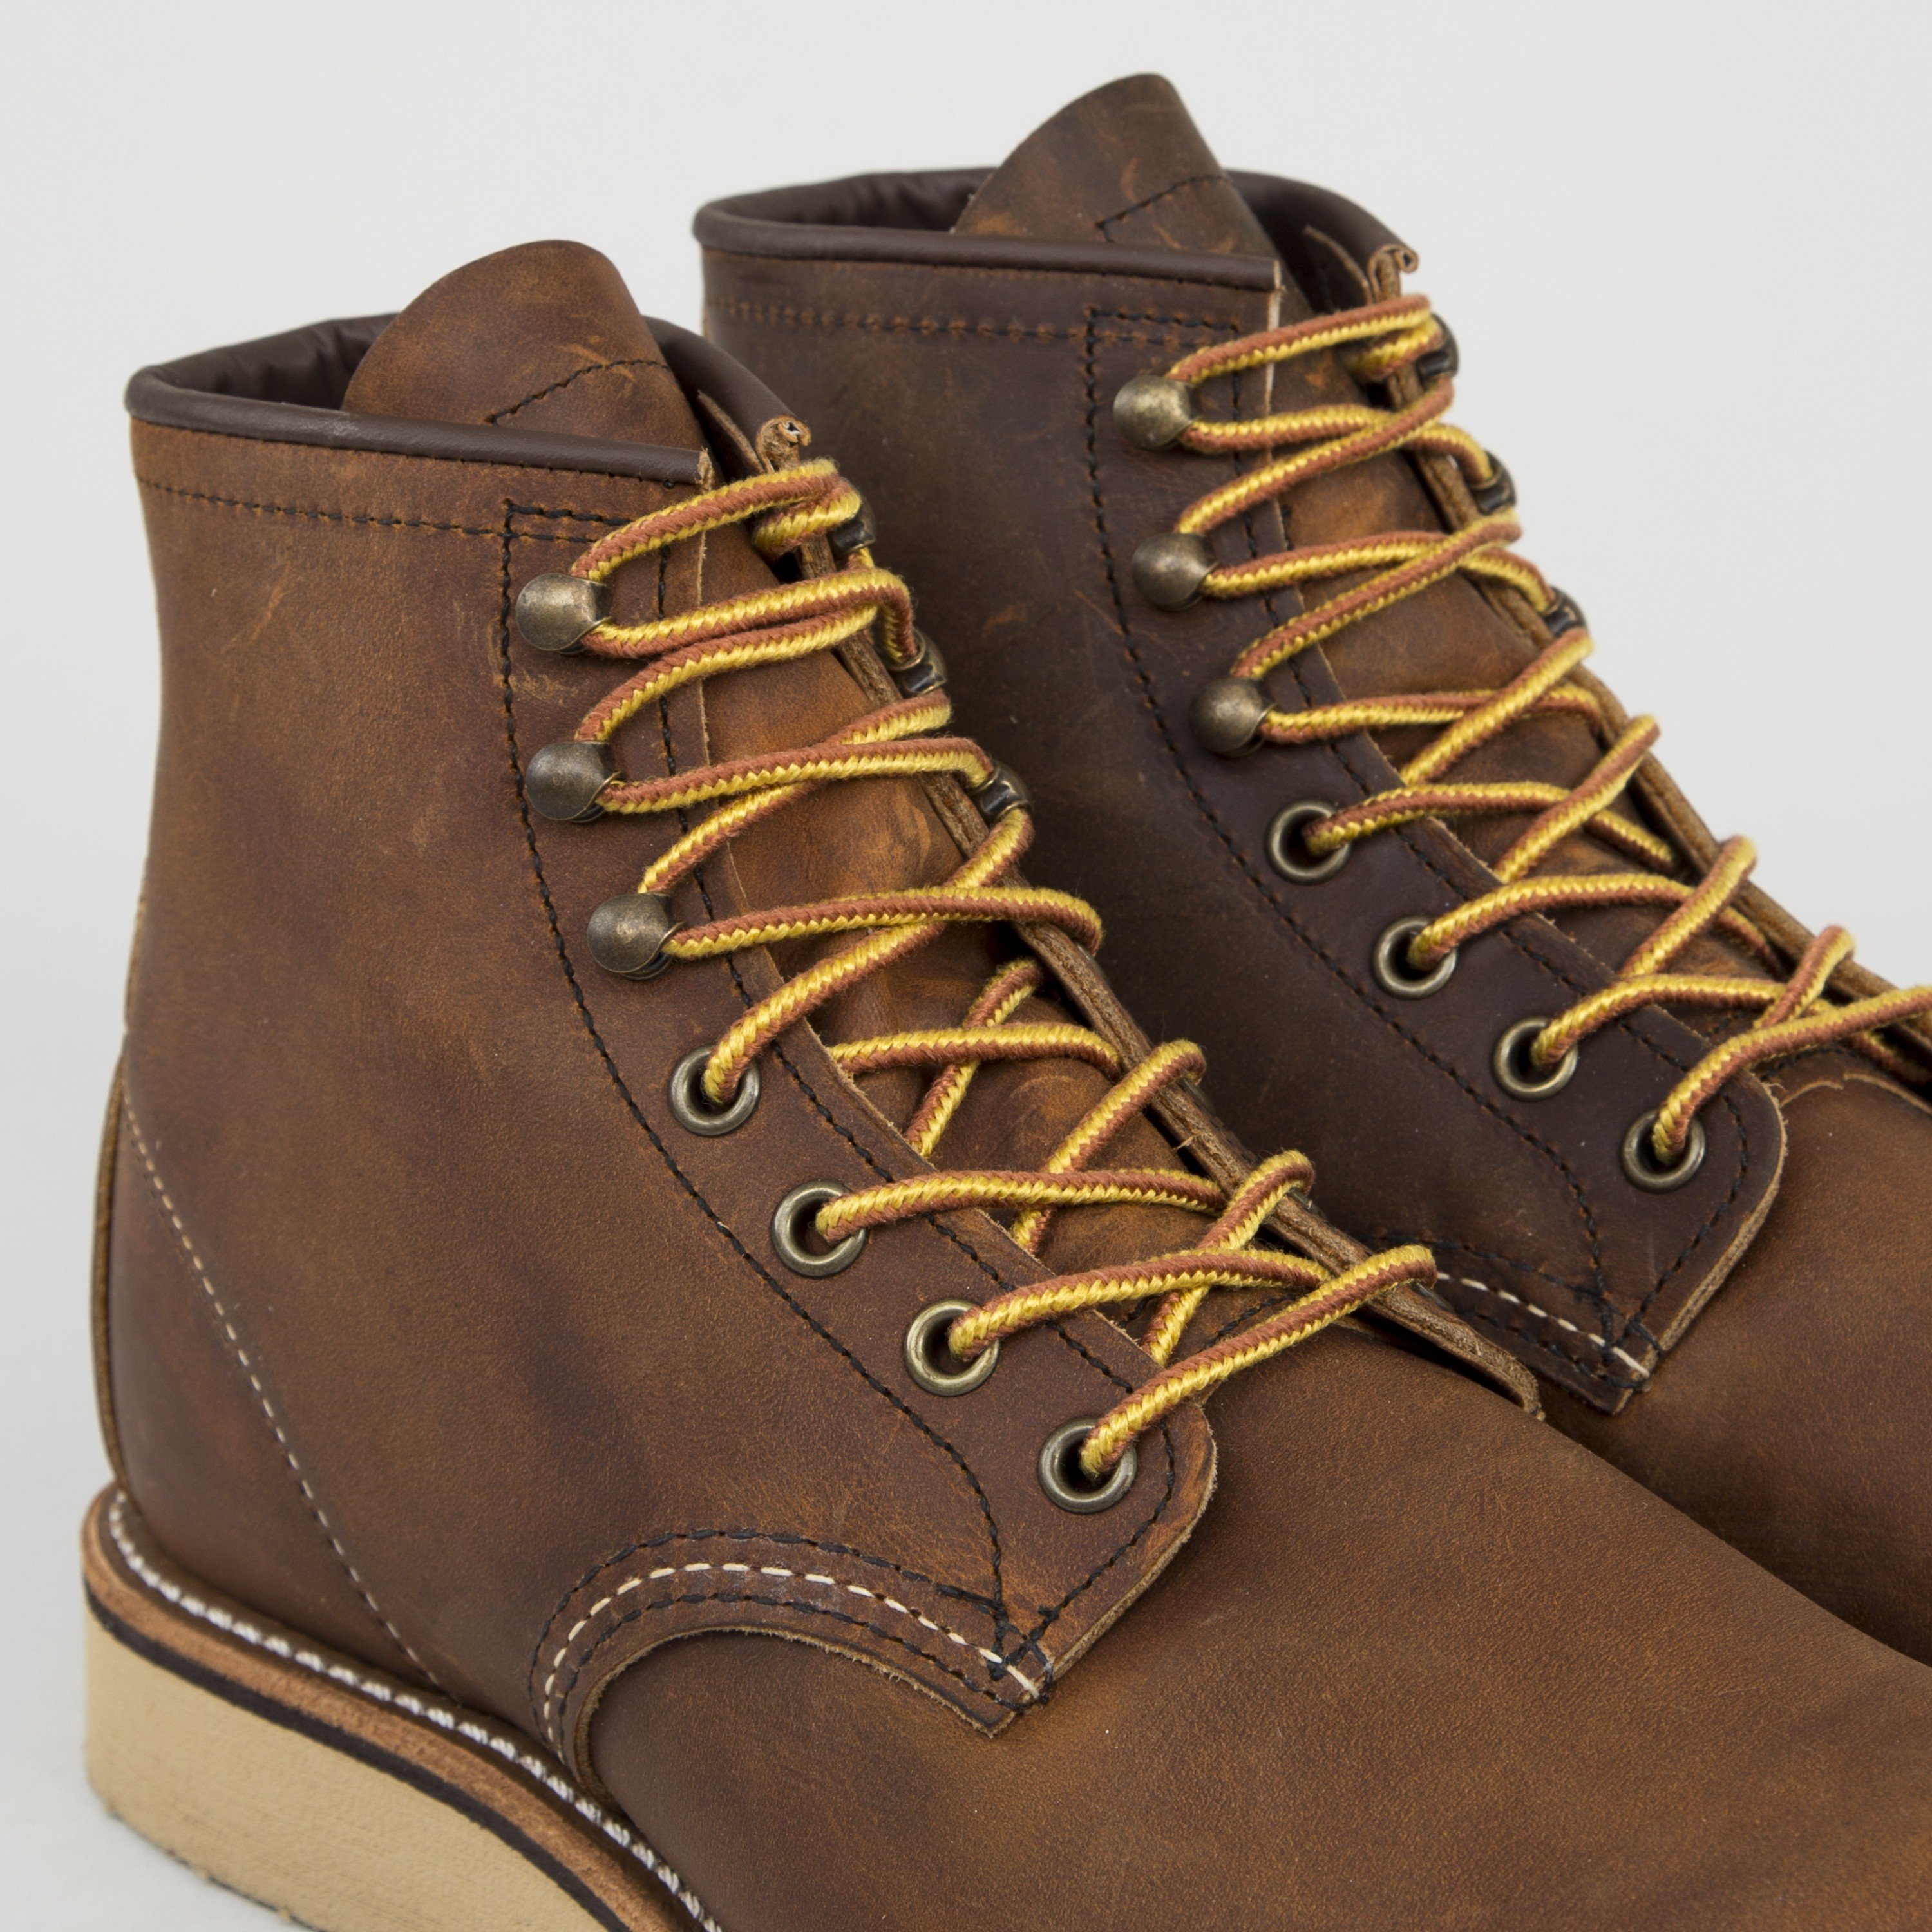 Red Wing 2950 Rover Round Toe 6” Boots (Copper Rough & Tough Leather ...